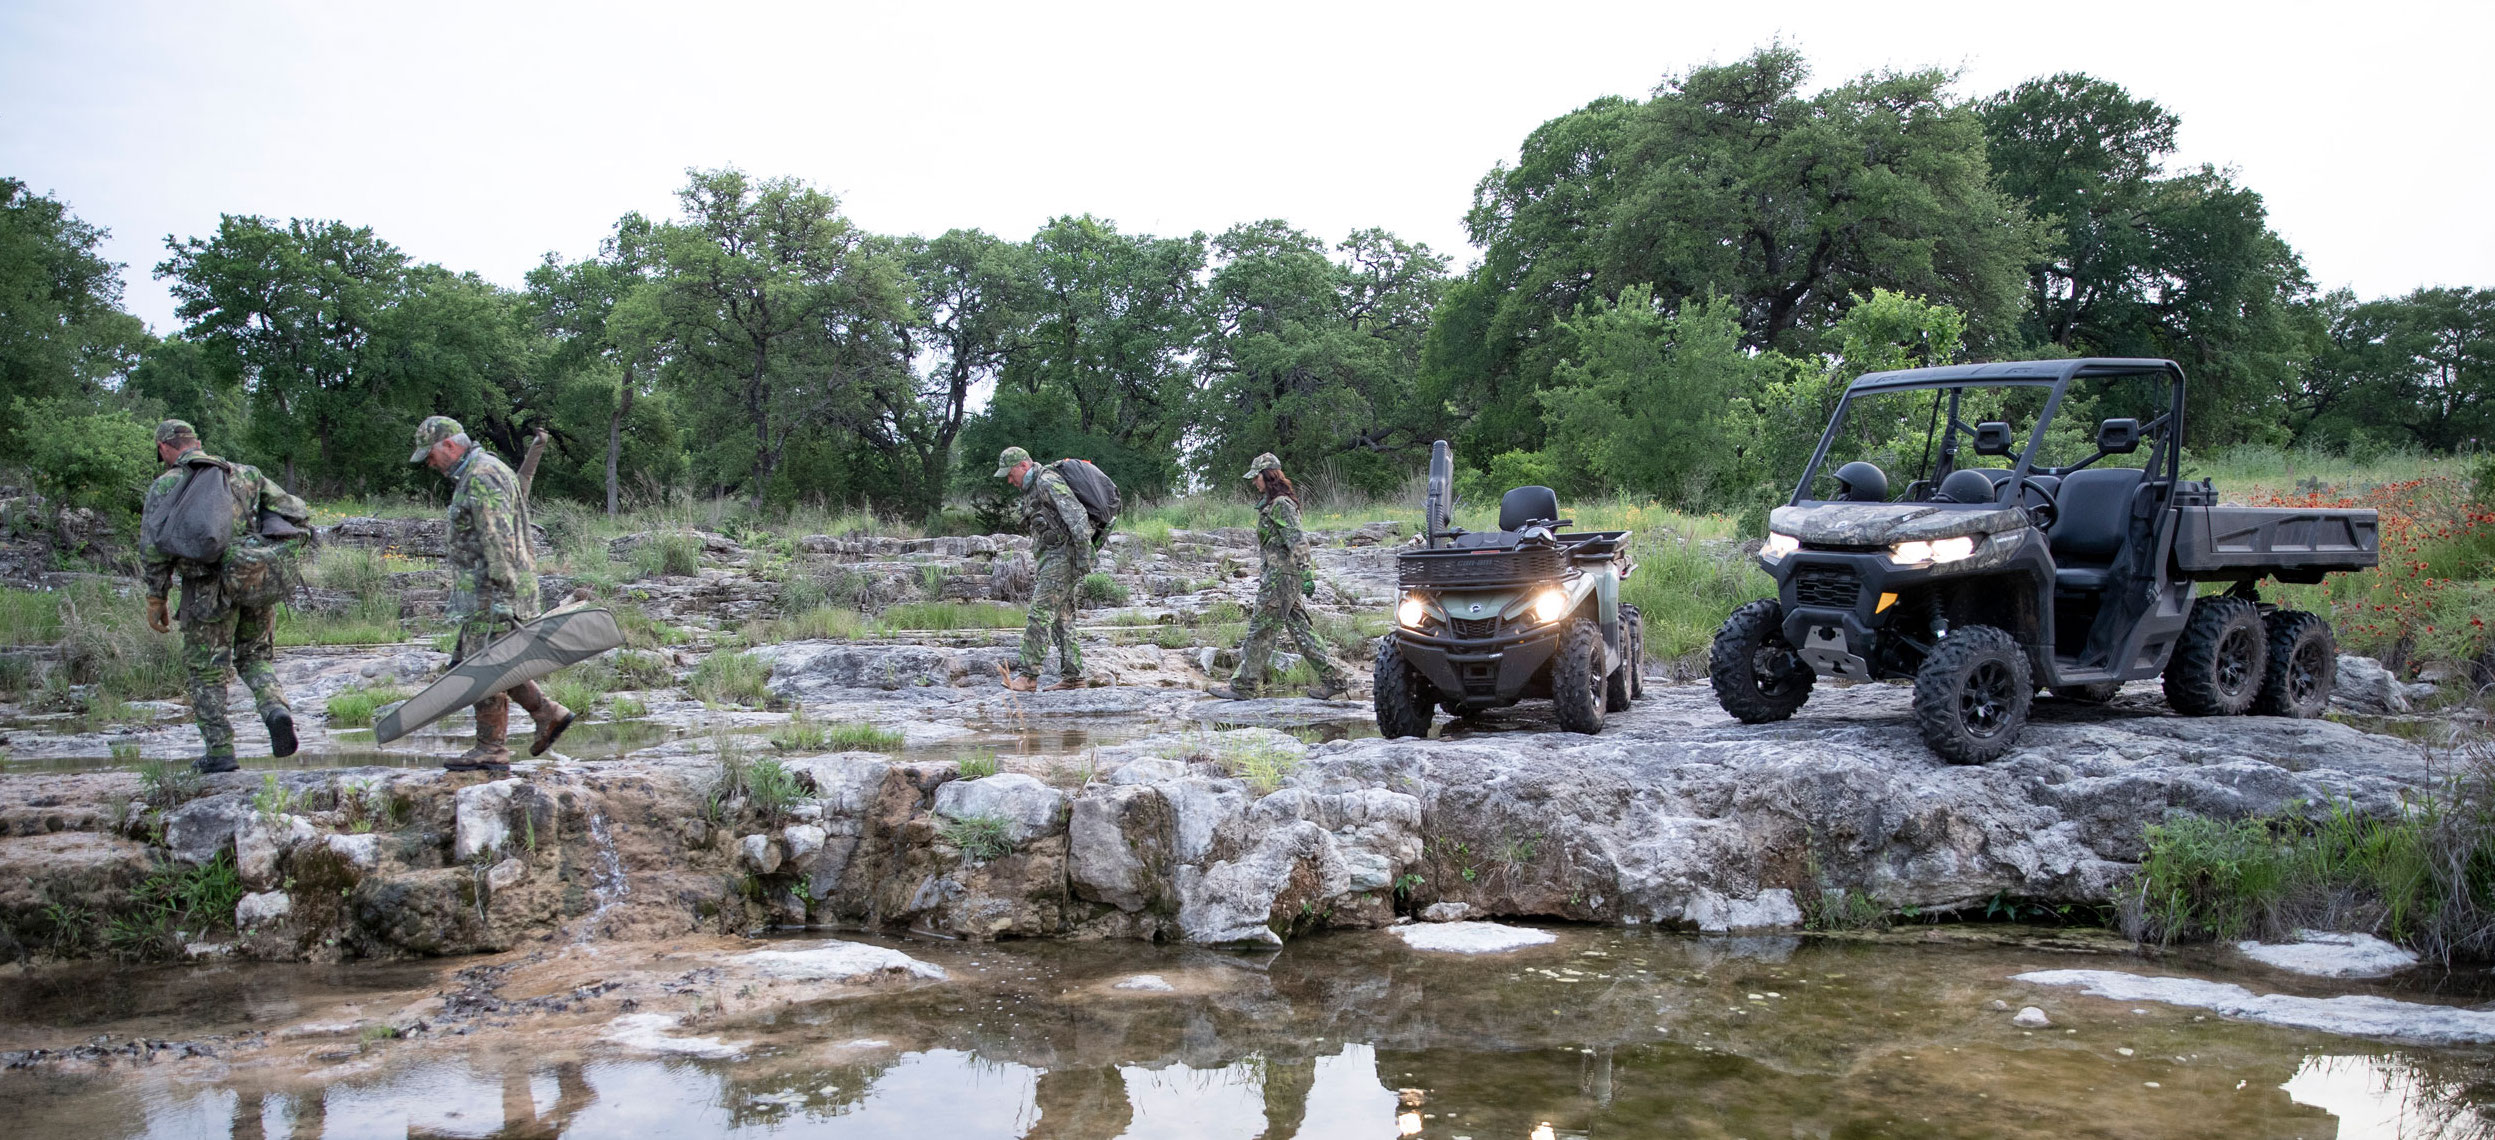 A group of hunters walking beside their Can-Am Outlander ATV and Can-Am Defender side-by-side